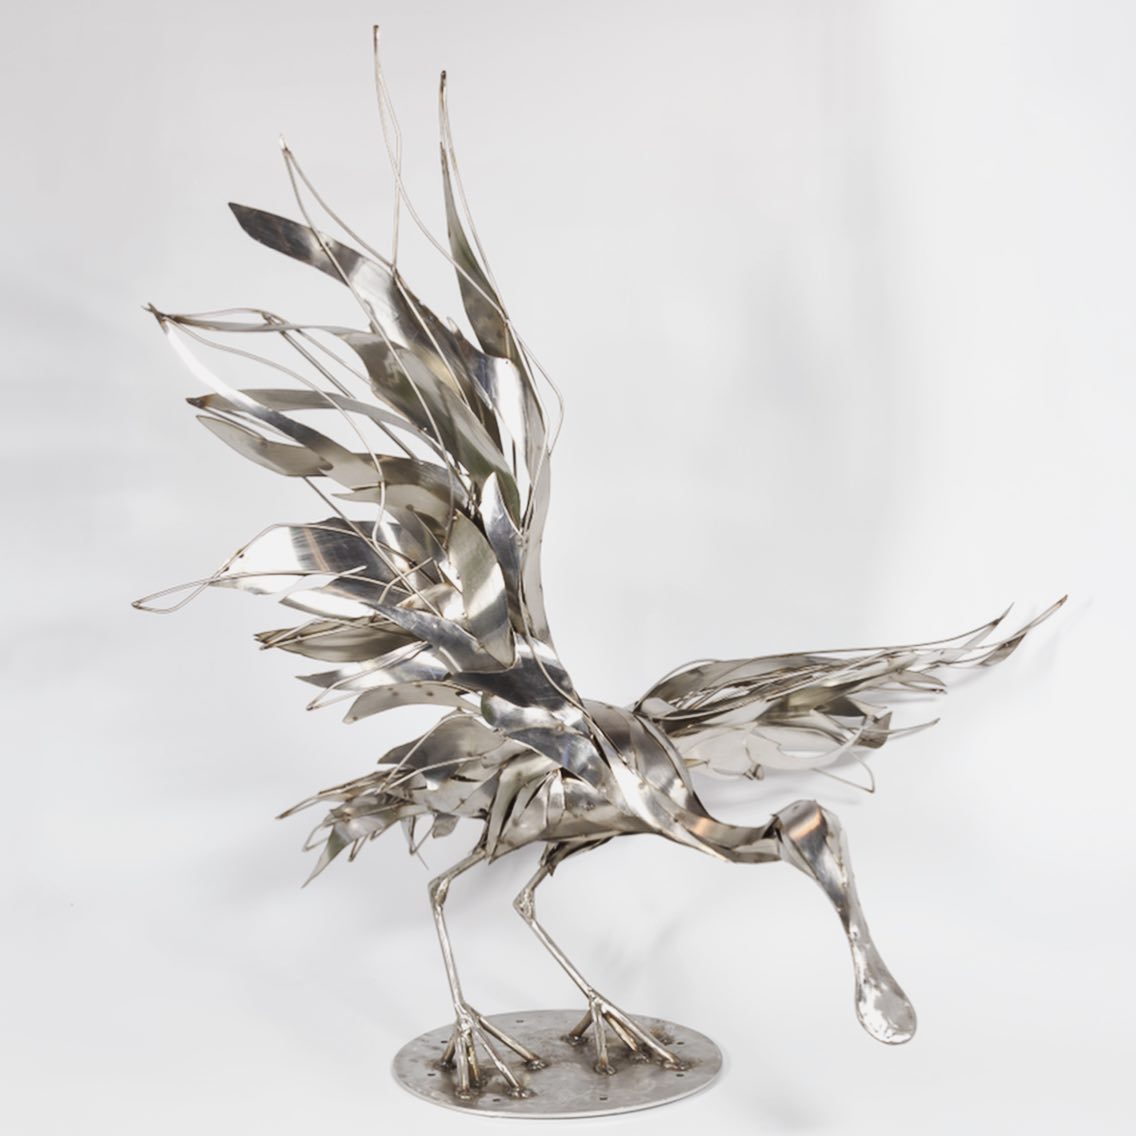 Magnificent Metallic Animal Sculptures Made With Sweeping Lines By Georgie Seccull (11)